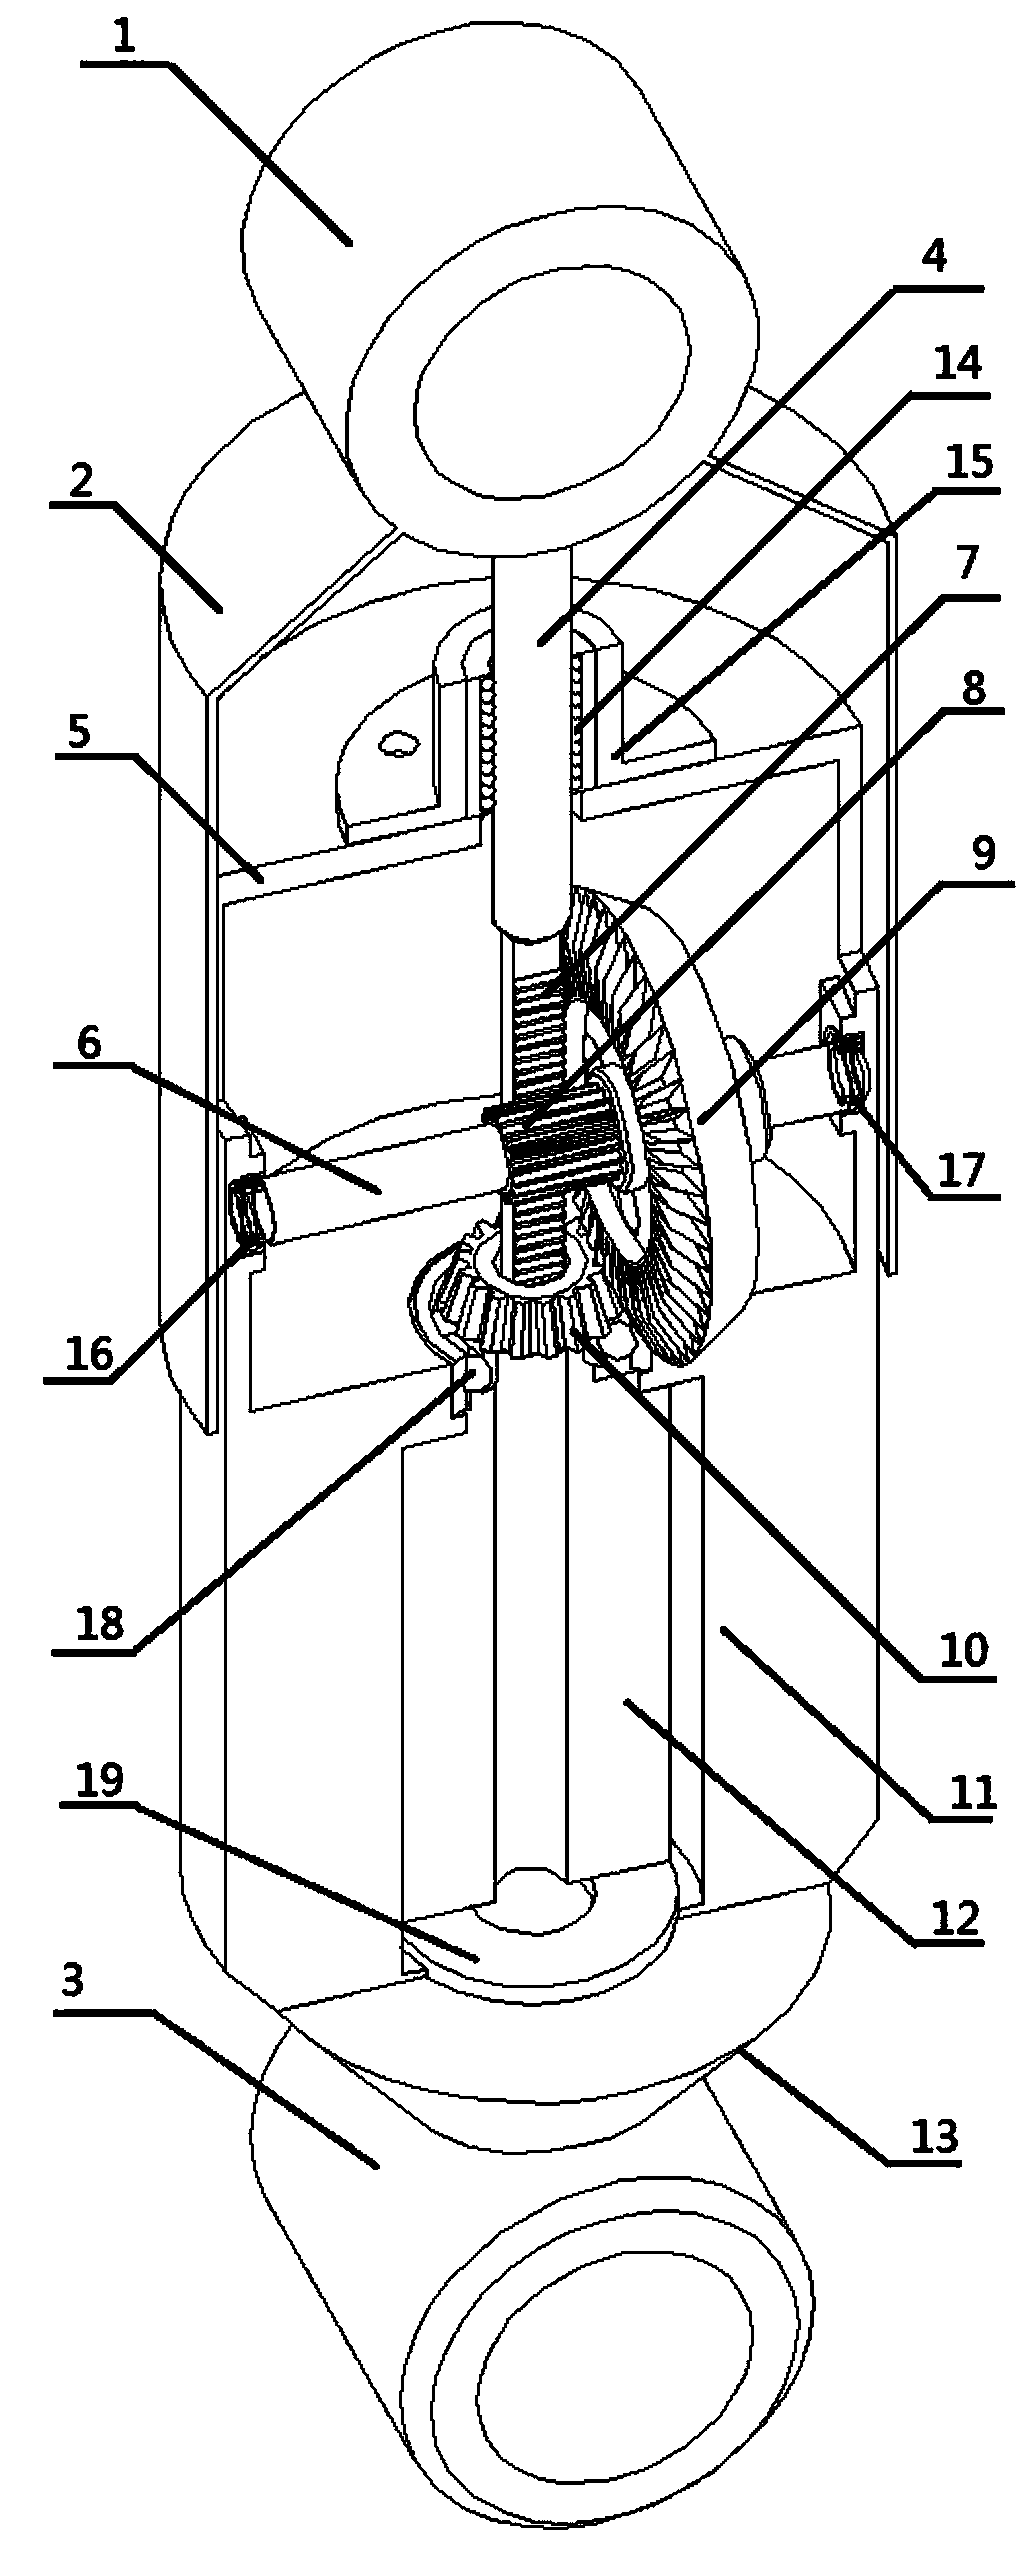 Pinion-and-rack rotating power generation car shock absorber